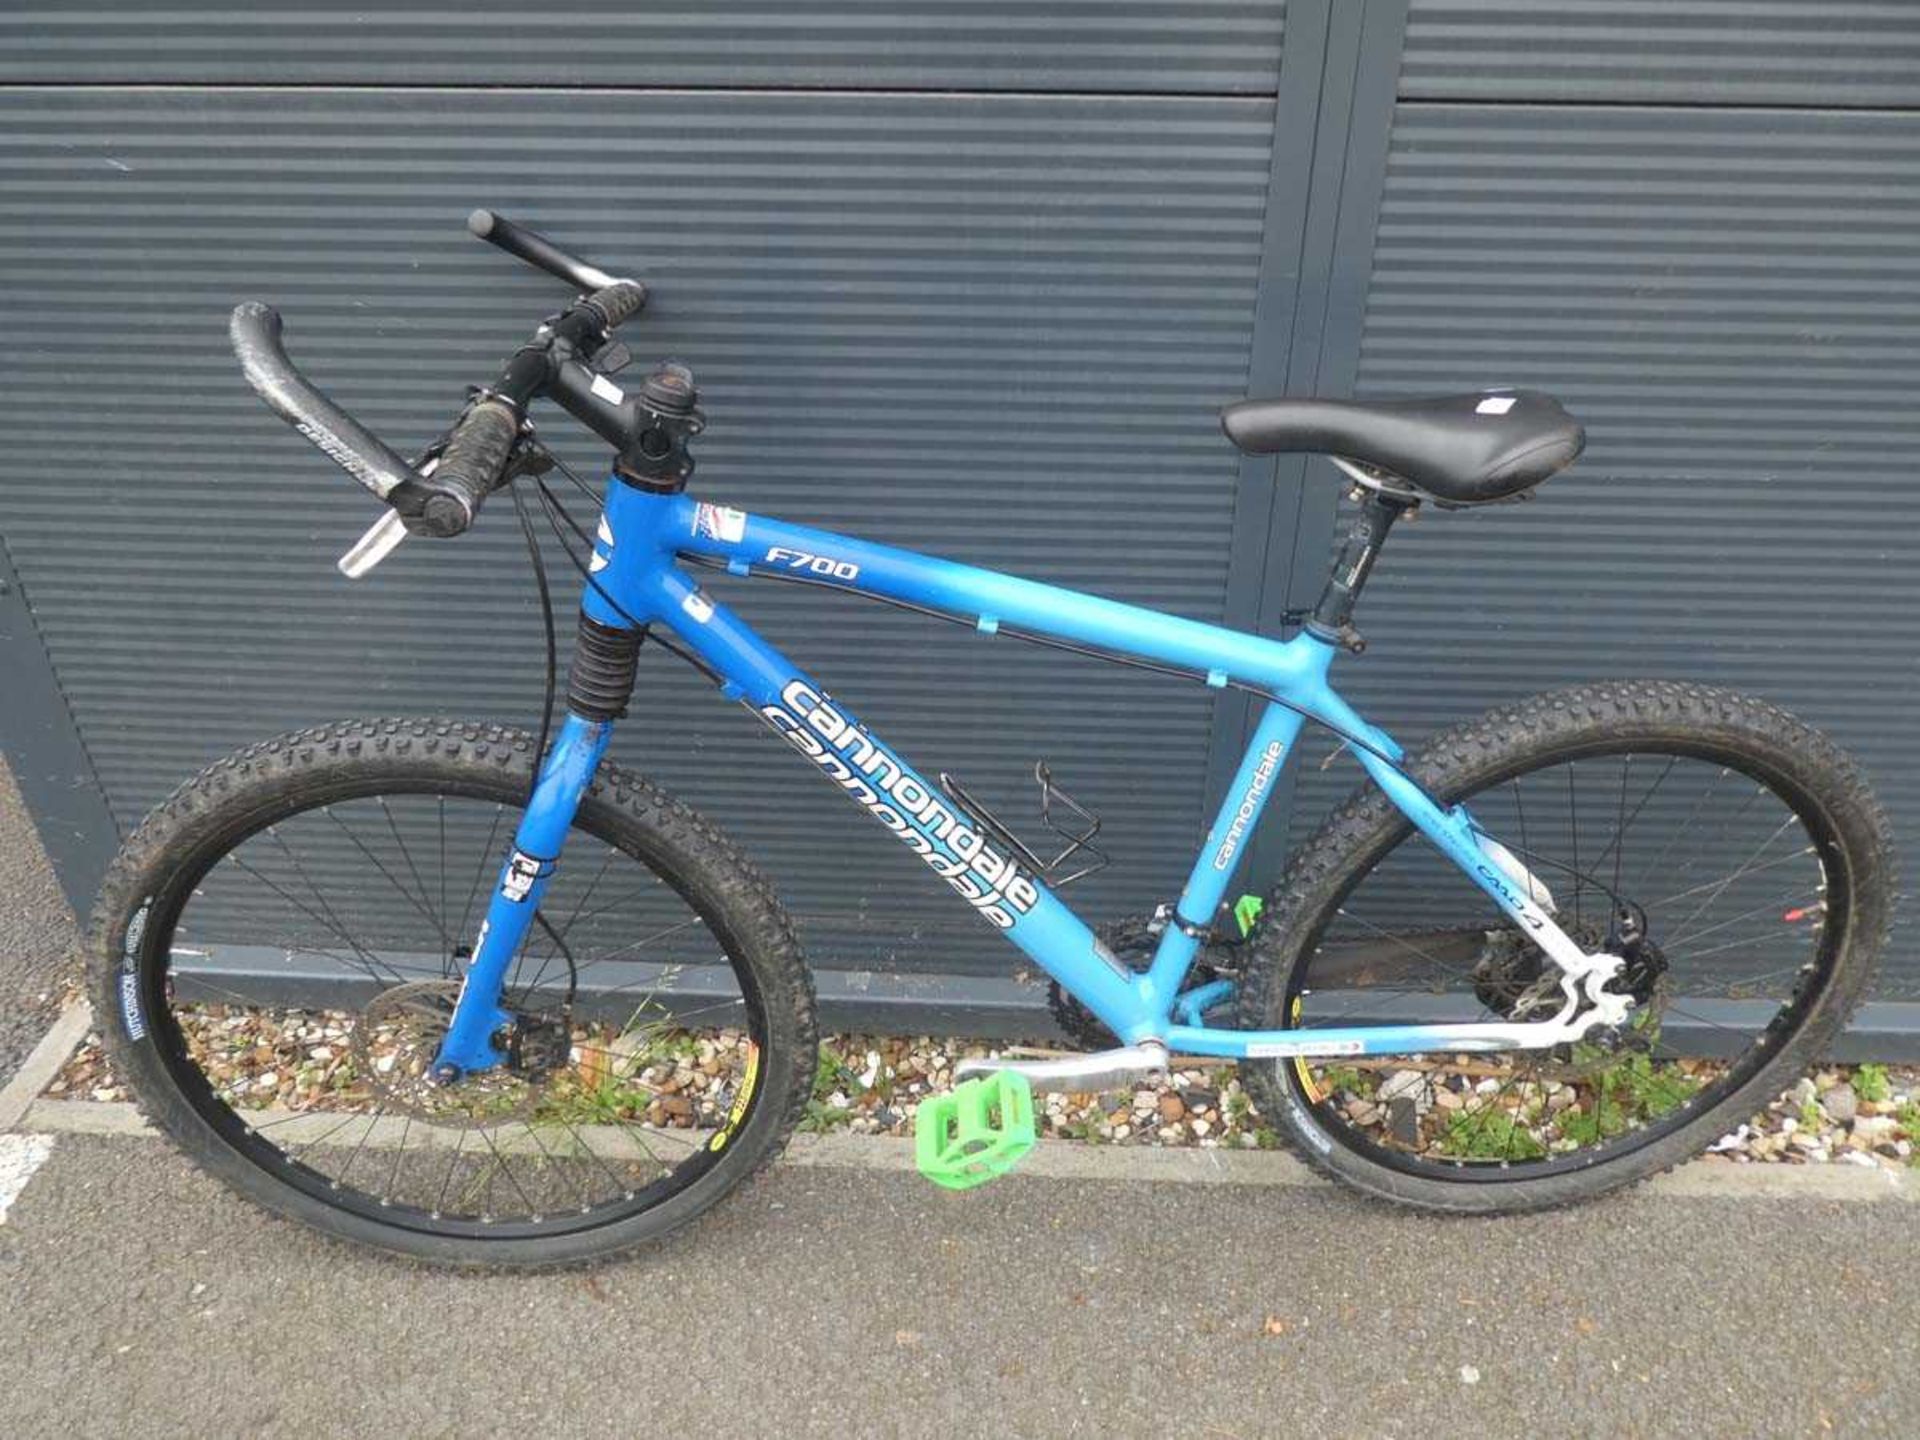 Cannondale F700 mountain cycle with blue frame